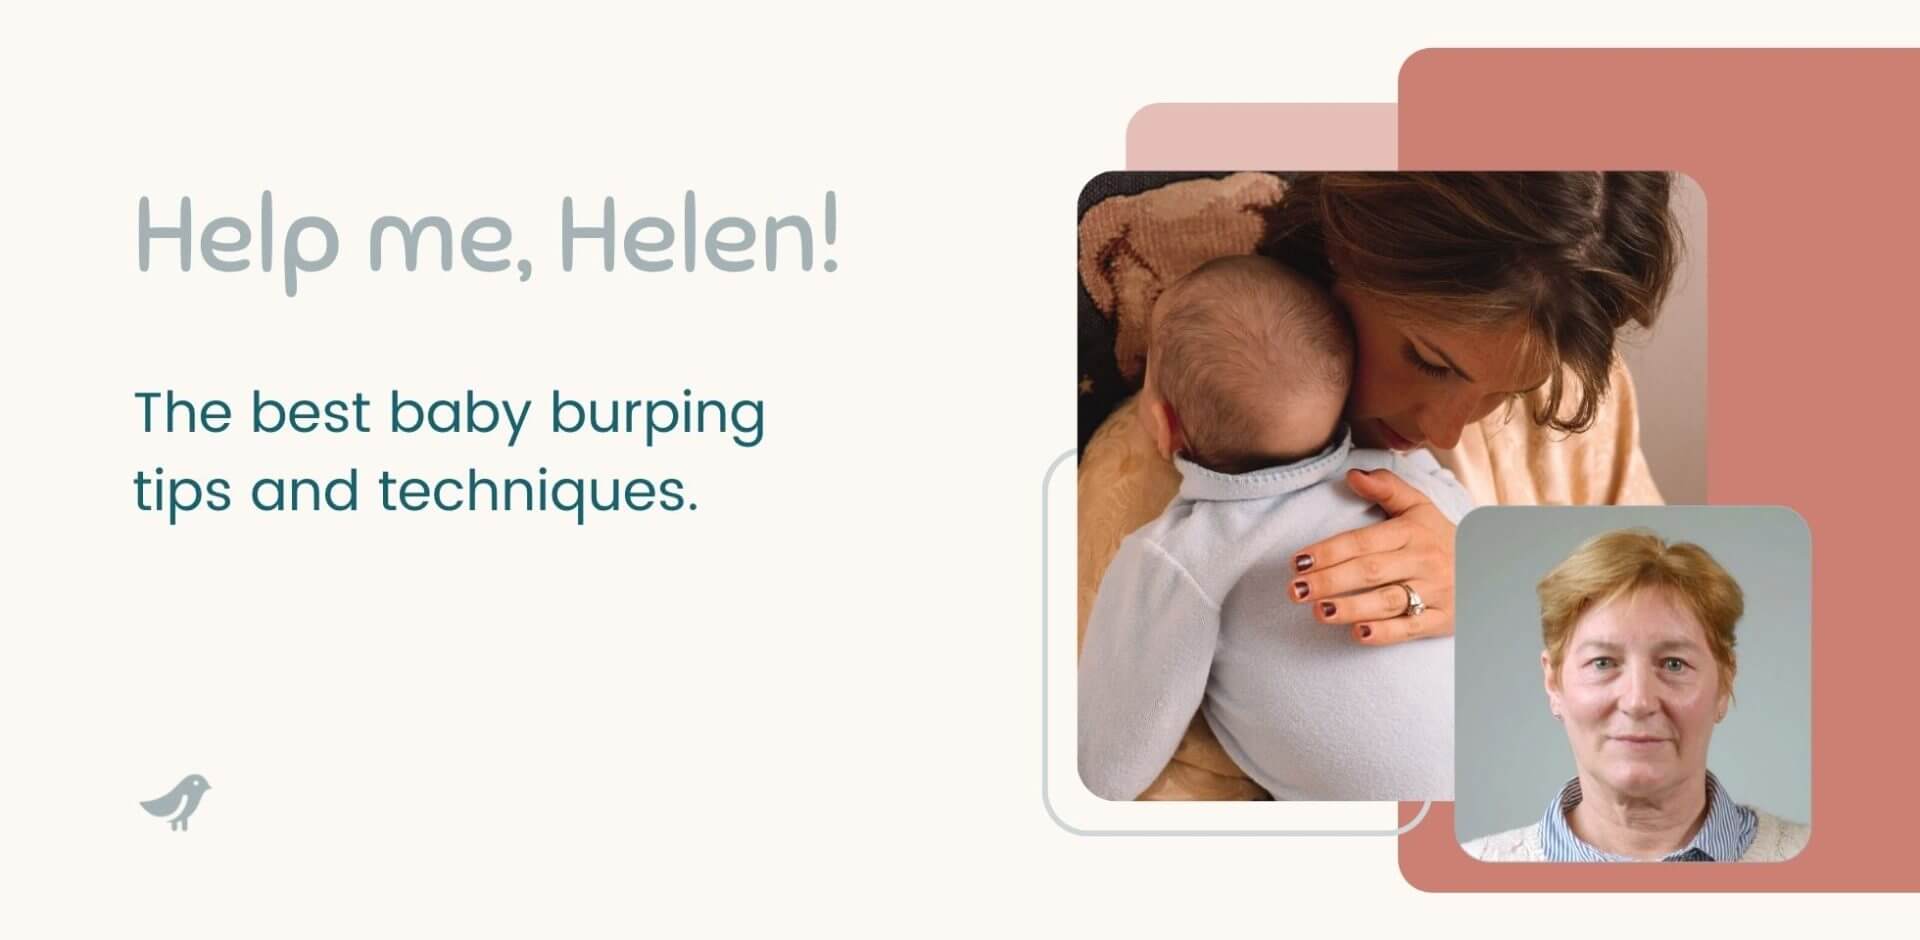 Help me, Helen! The Best Baby Burping Tips and Techniques.